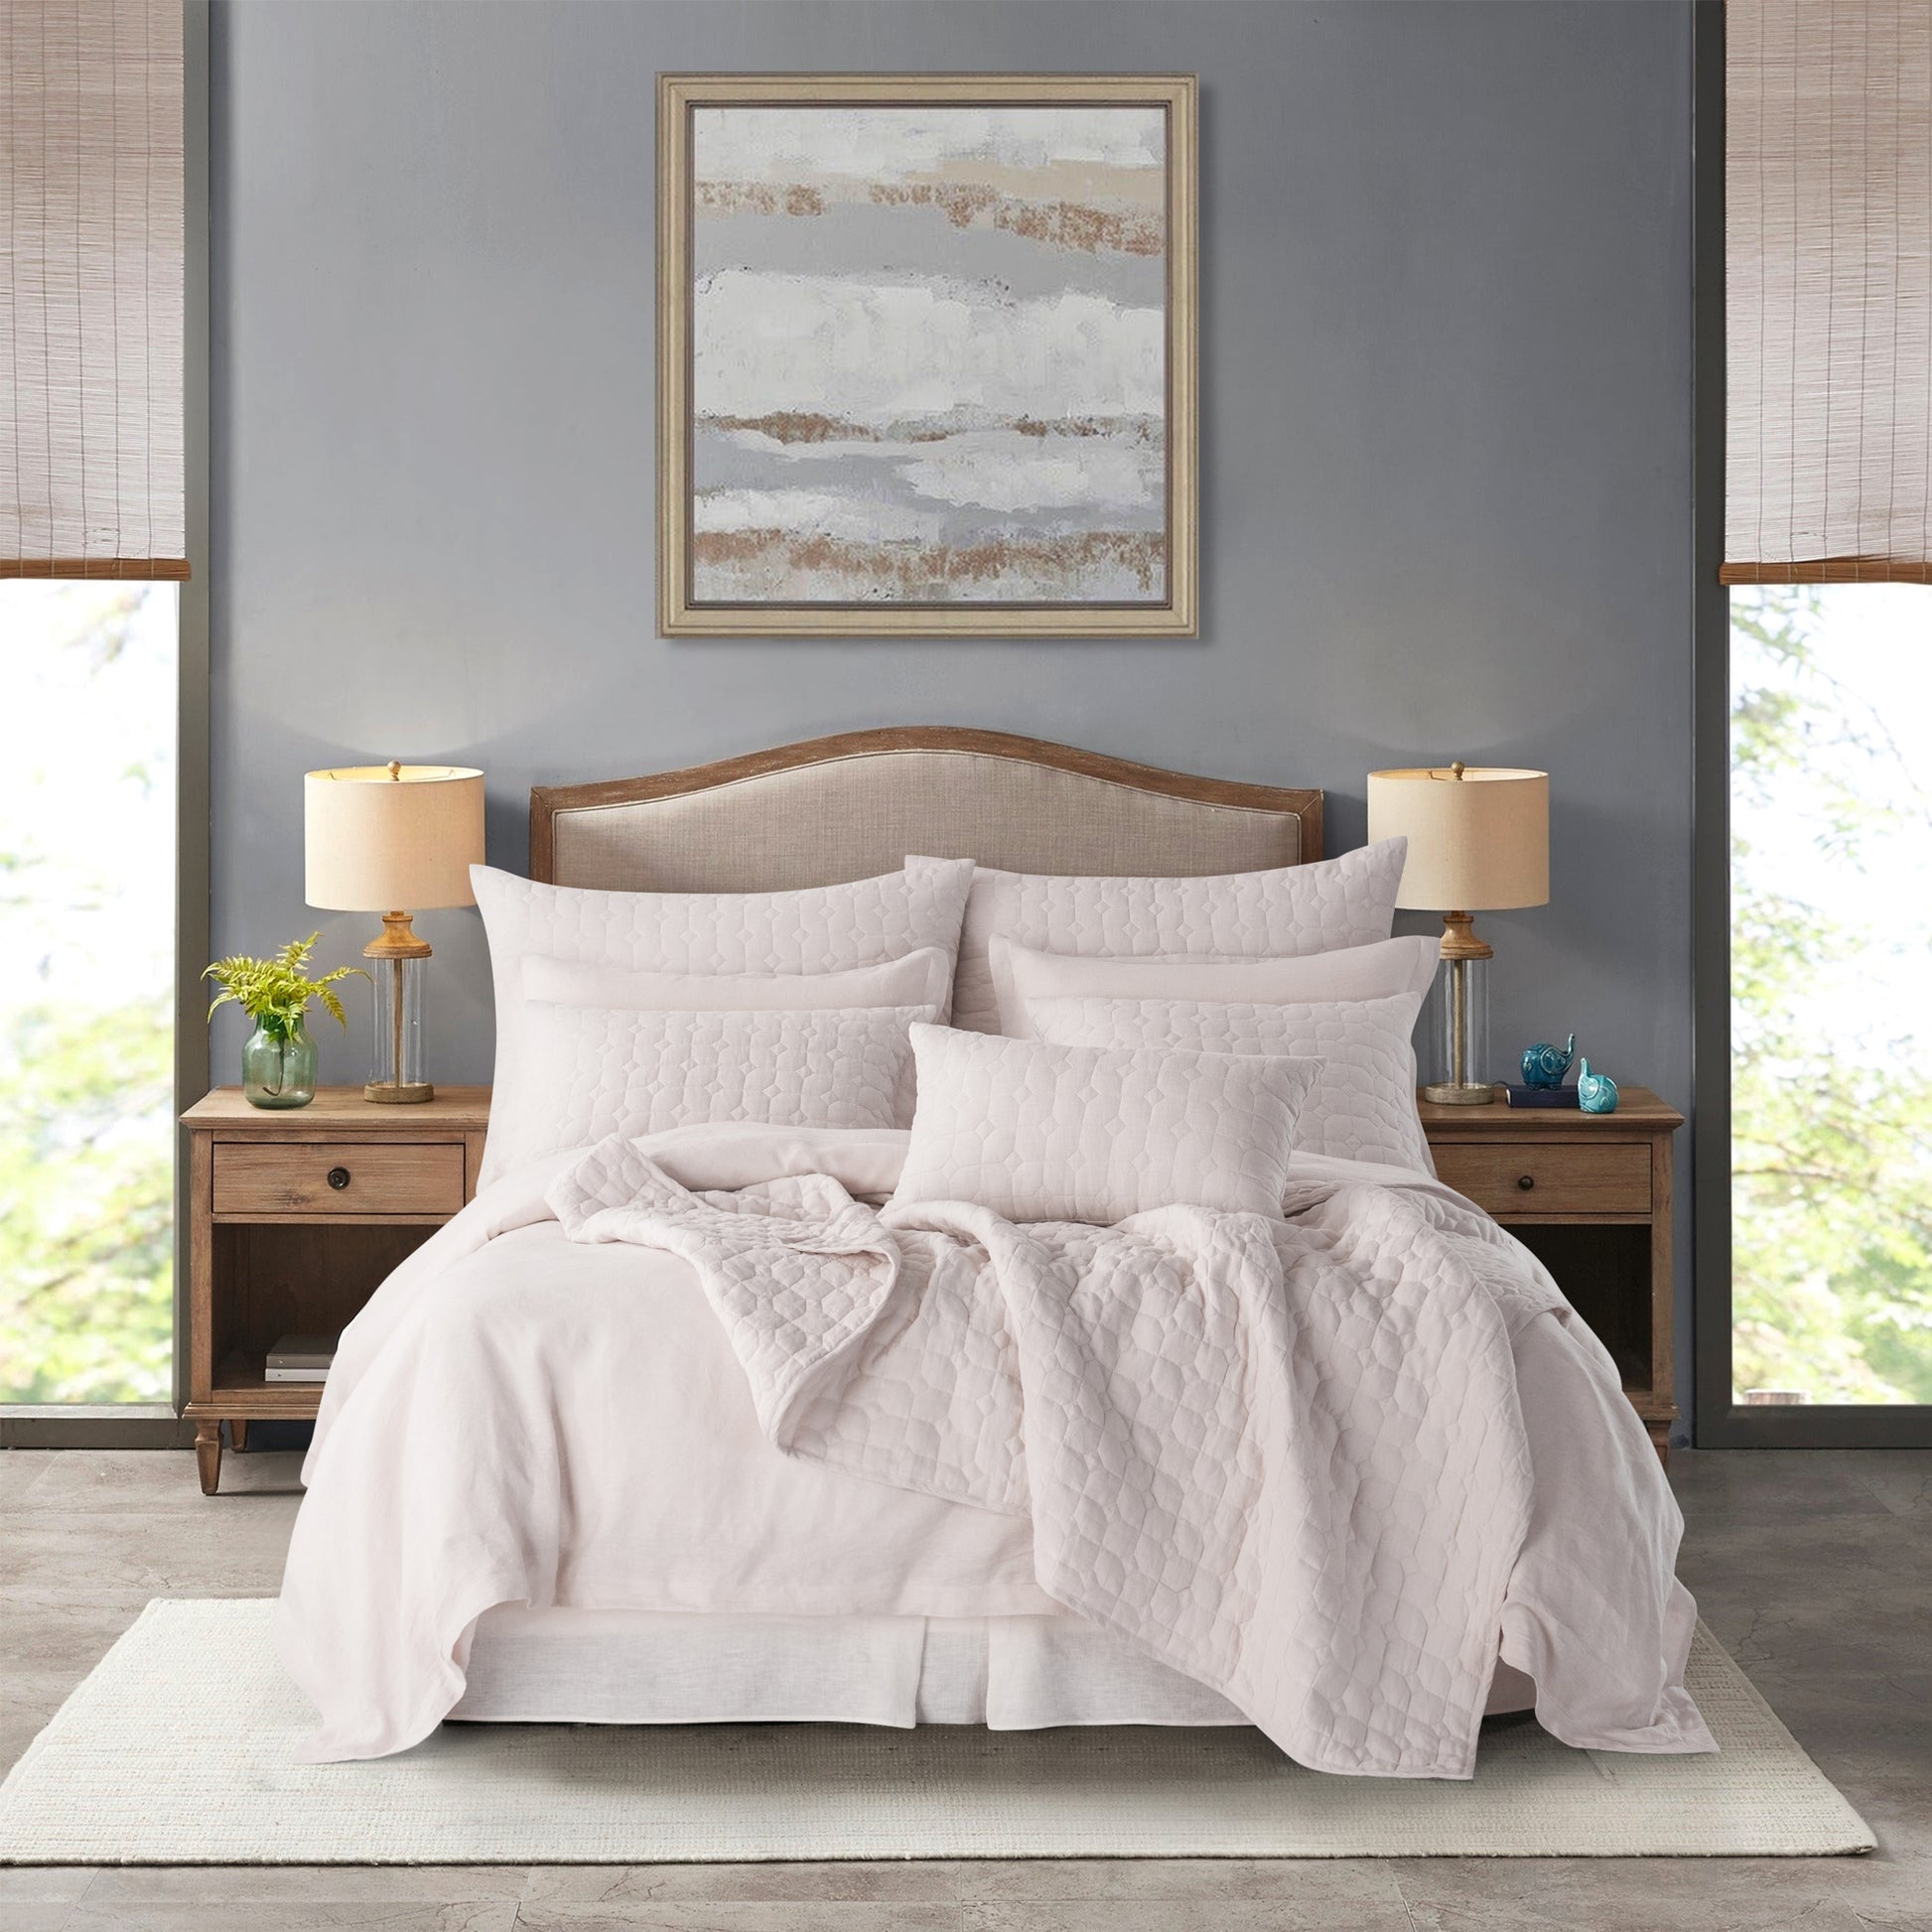 Shop Bedroom sets queen size for luxurious bedding